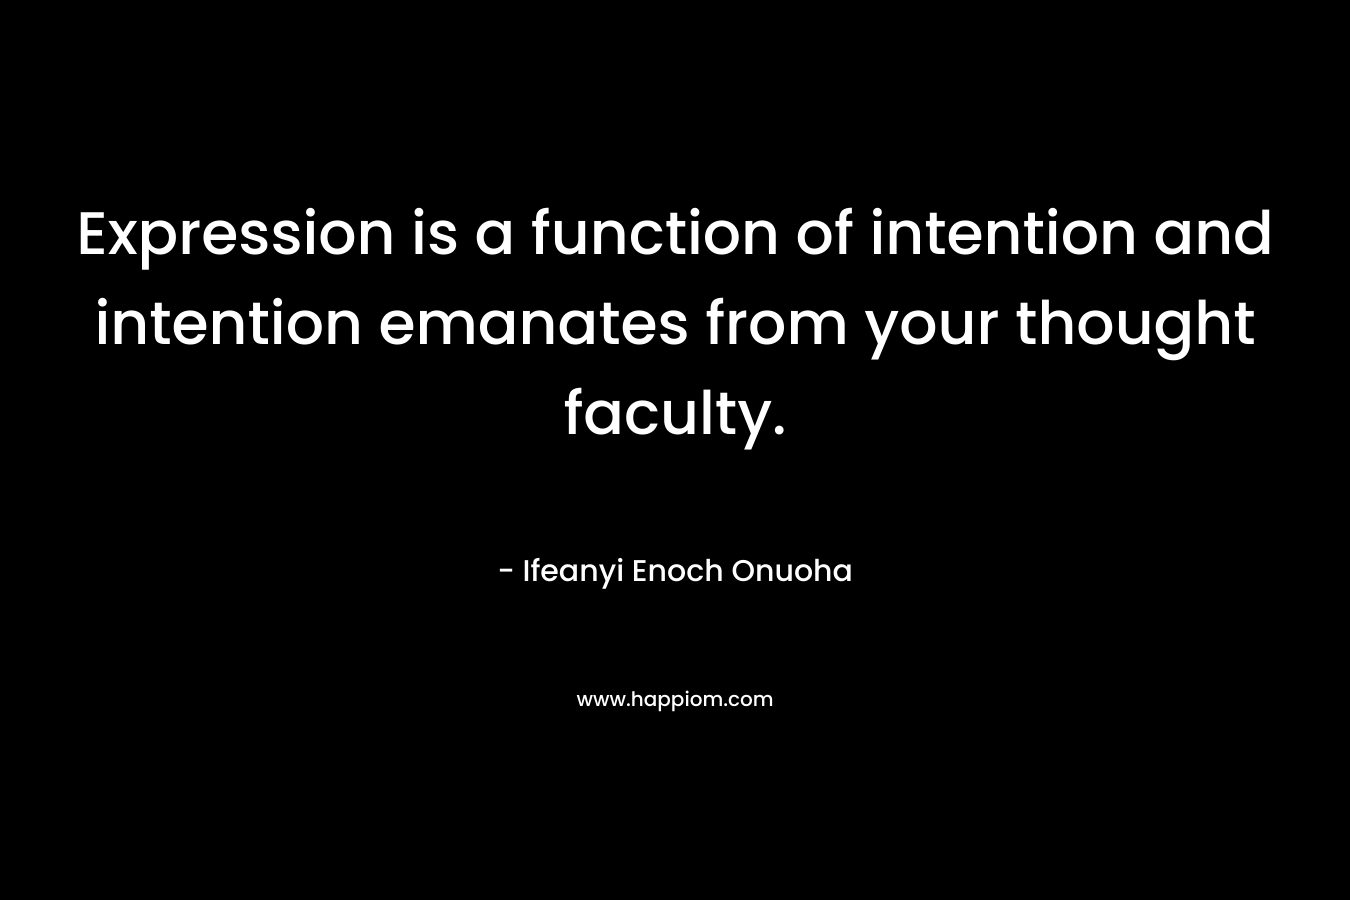 Expression is a function of intention and intention emanates from your thought faculty.